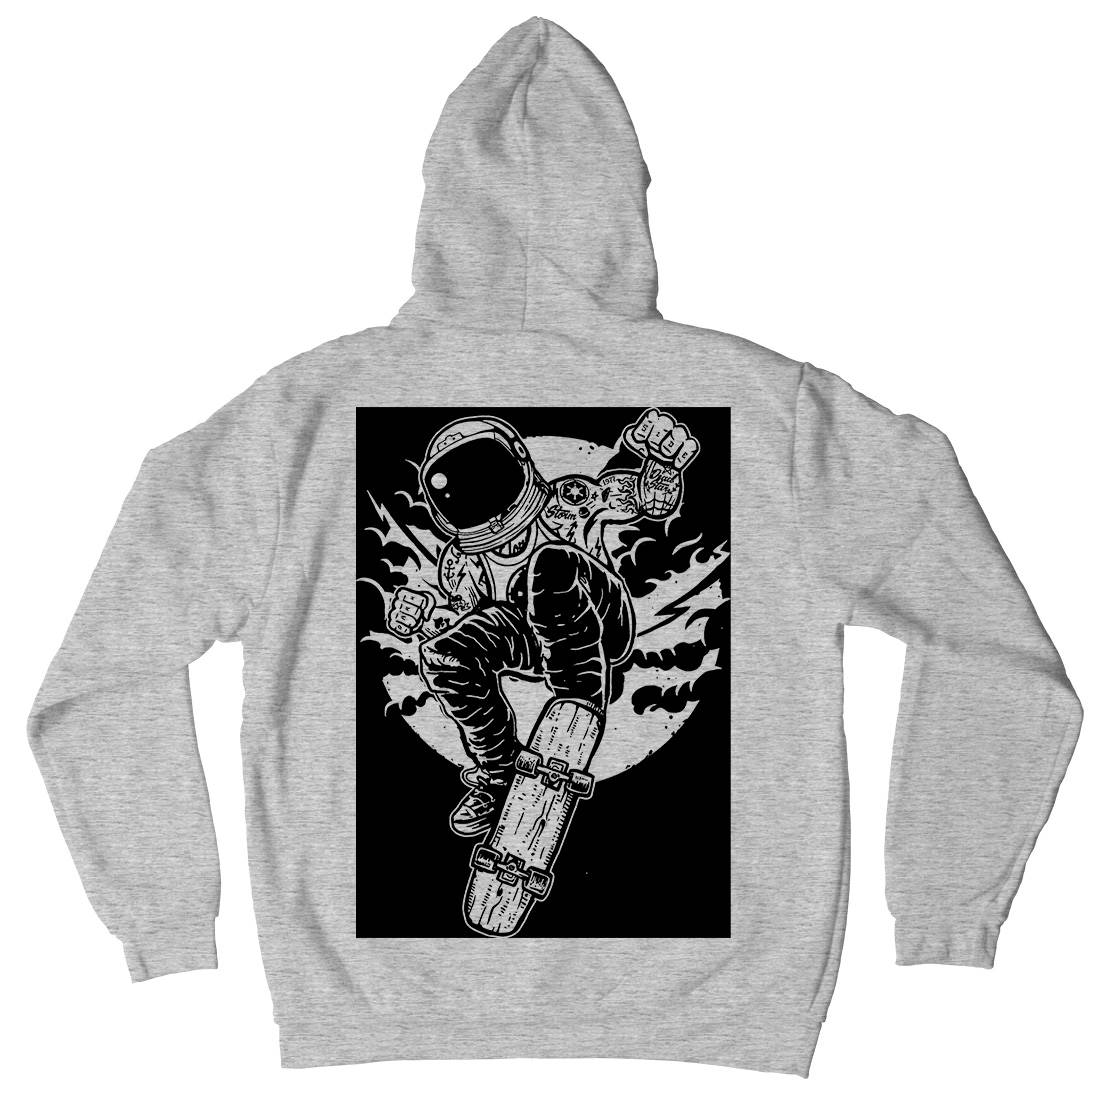 Skater Kids Crew Neck Hoodie Space A576